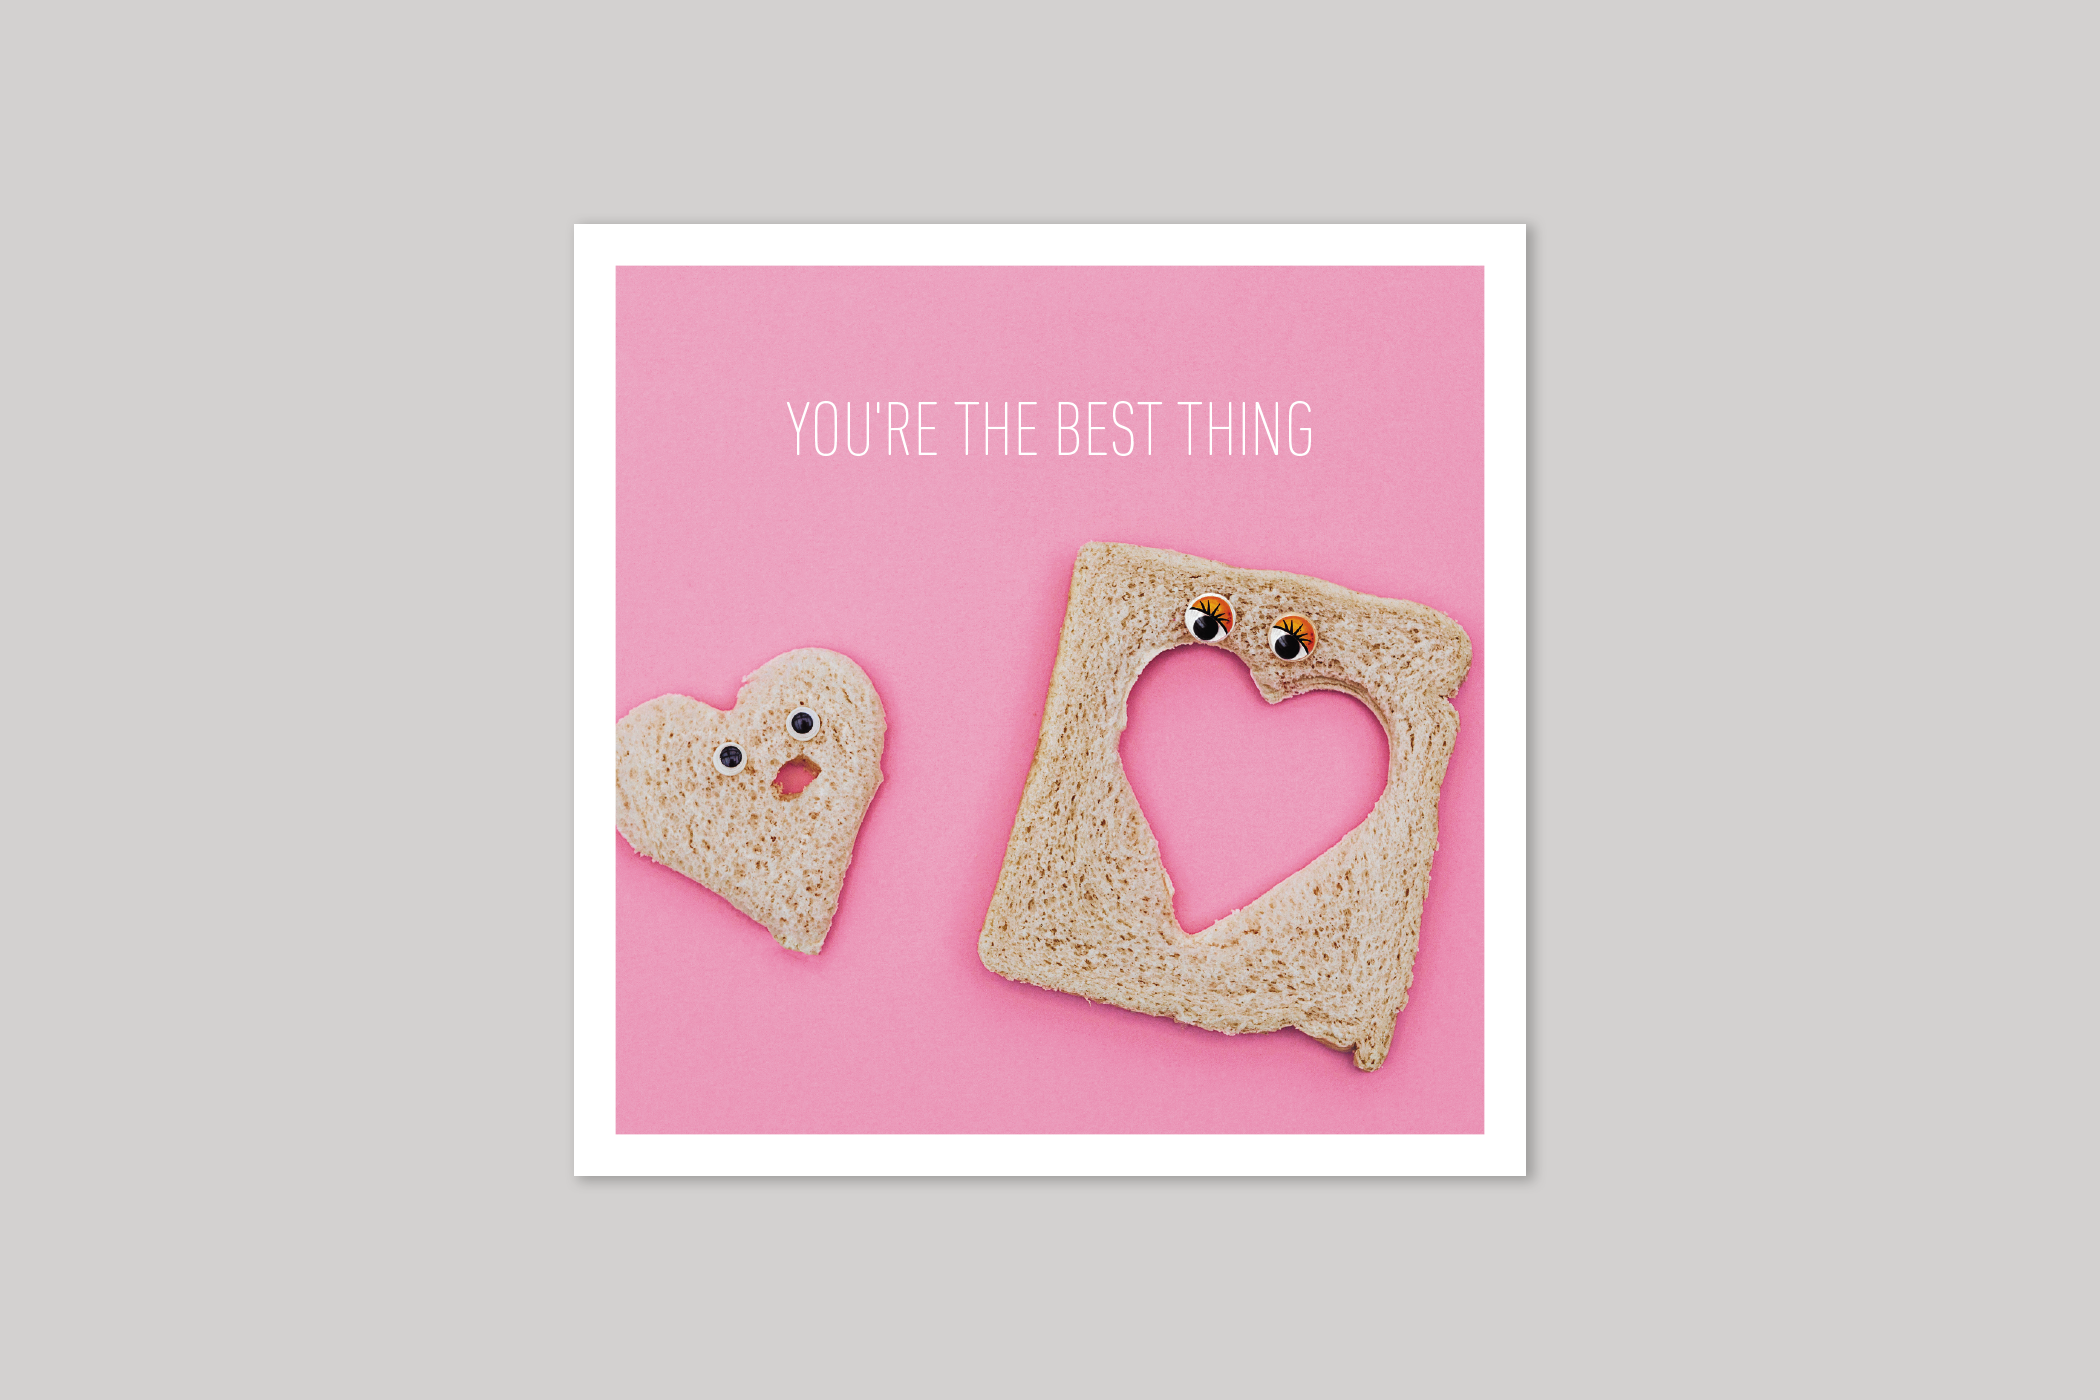 You're the Best Thing from Beautiful Days range of contemporary photographic cards by Icon.